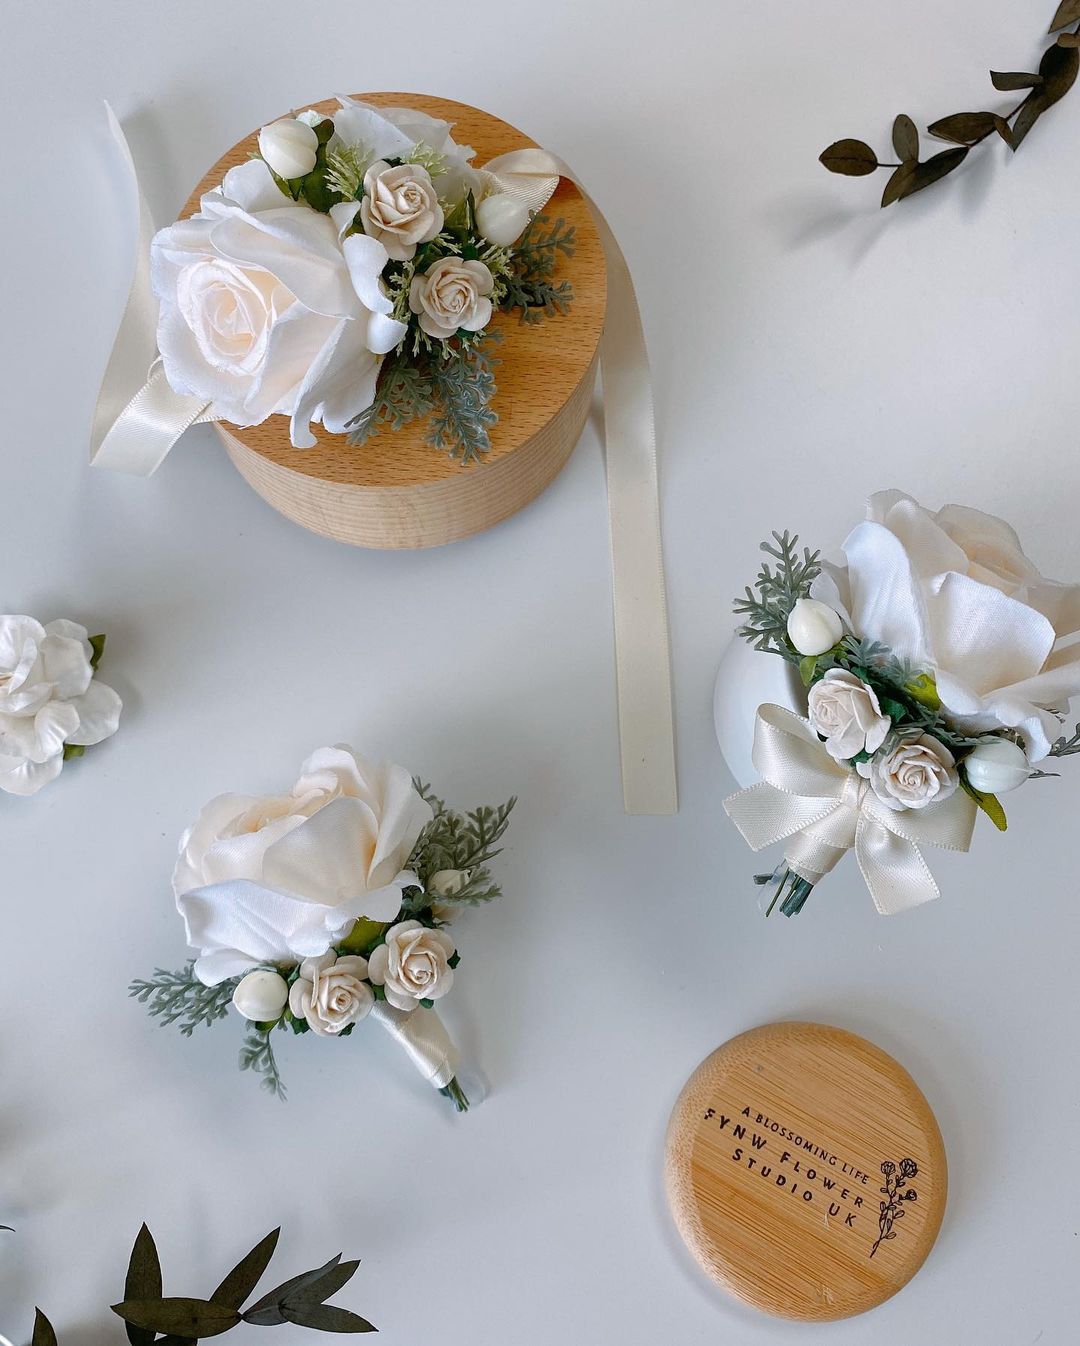 Eden Bridegroom Corsage Wedding Props -R220 is a corsage made of artificial flowers for weddings and other events. Corsage consists of white roses, violets and leaves and is adorned with a metal frame. Big enough for your guests to take pictures and keep. It&